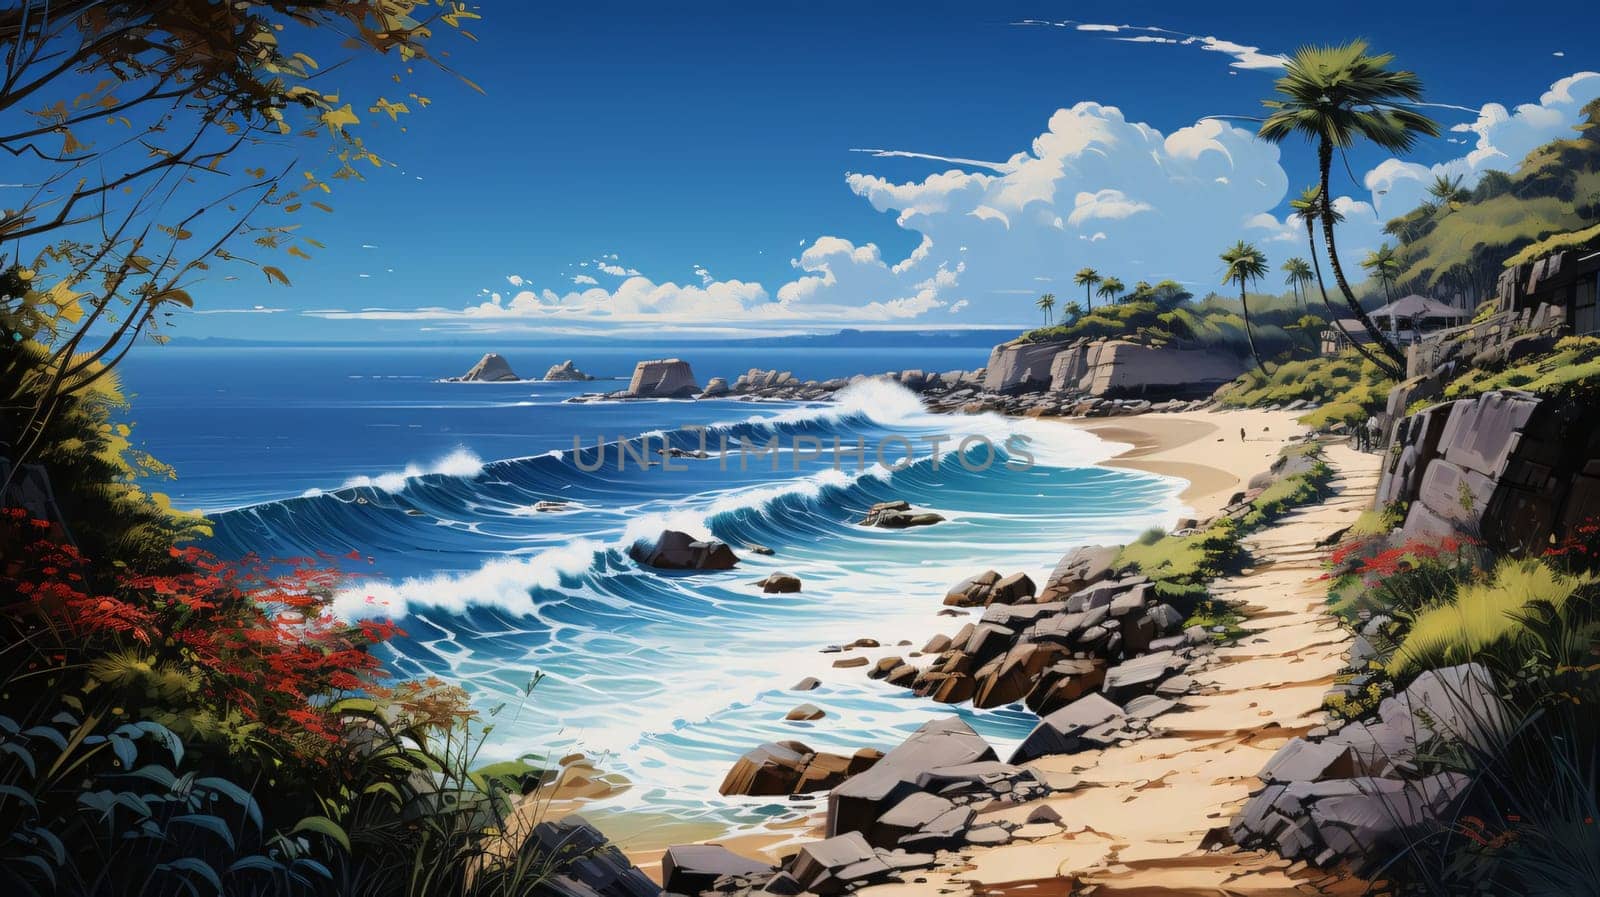 Digital painting of a beach with palm trees, rocks and ocean in the background by ThemesS